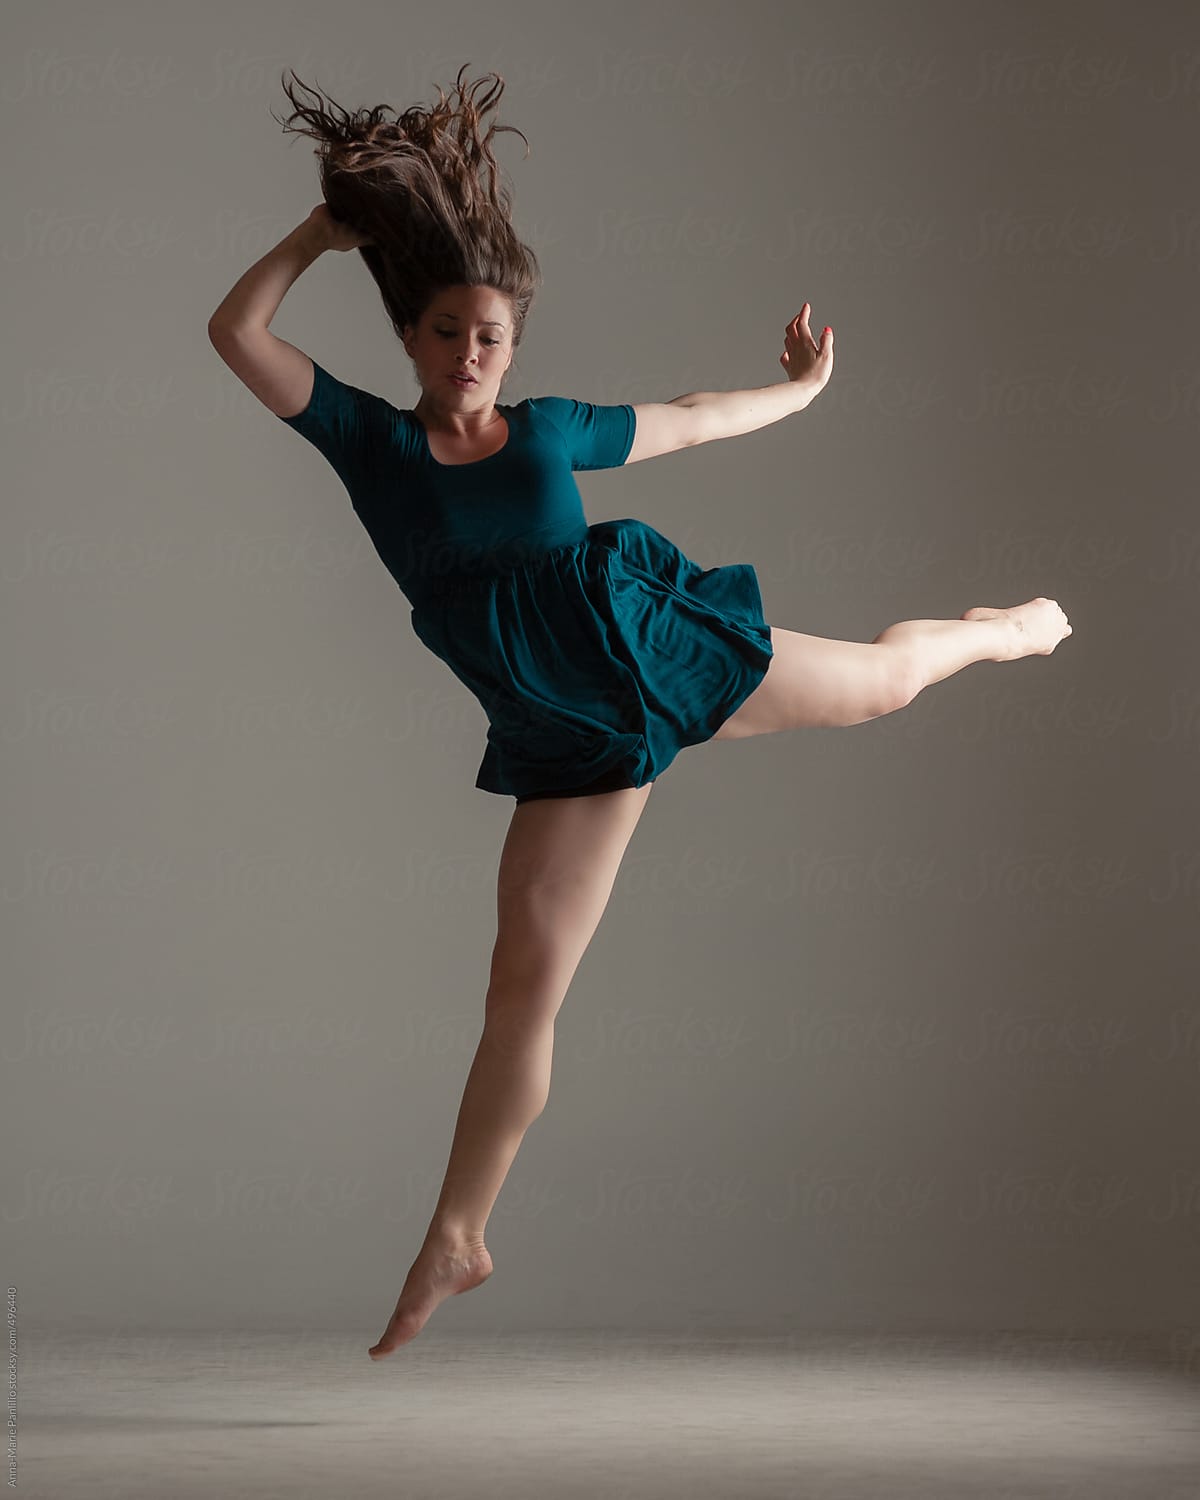 Brunette Female Contemporary Dancer With Short Green Dress by Stocksy  Contributor Anna-Marie Panlilio - Stocksy